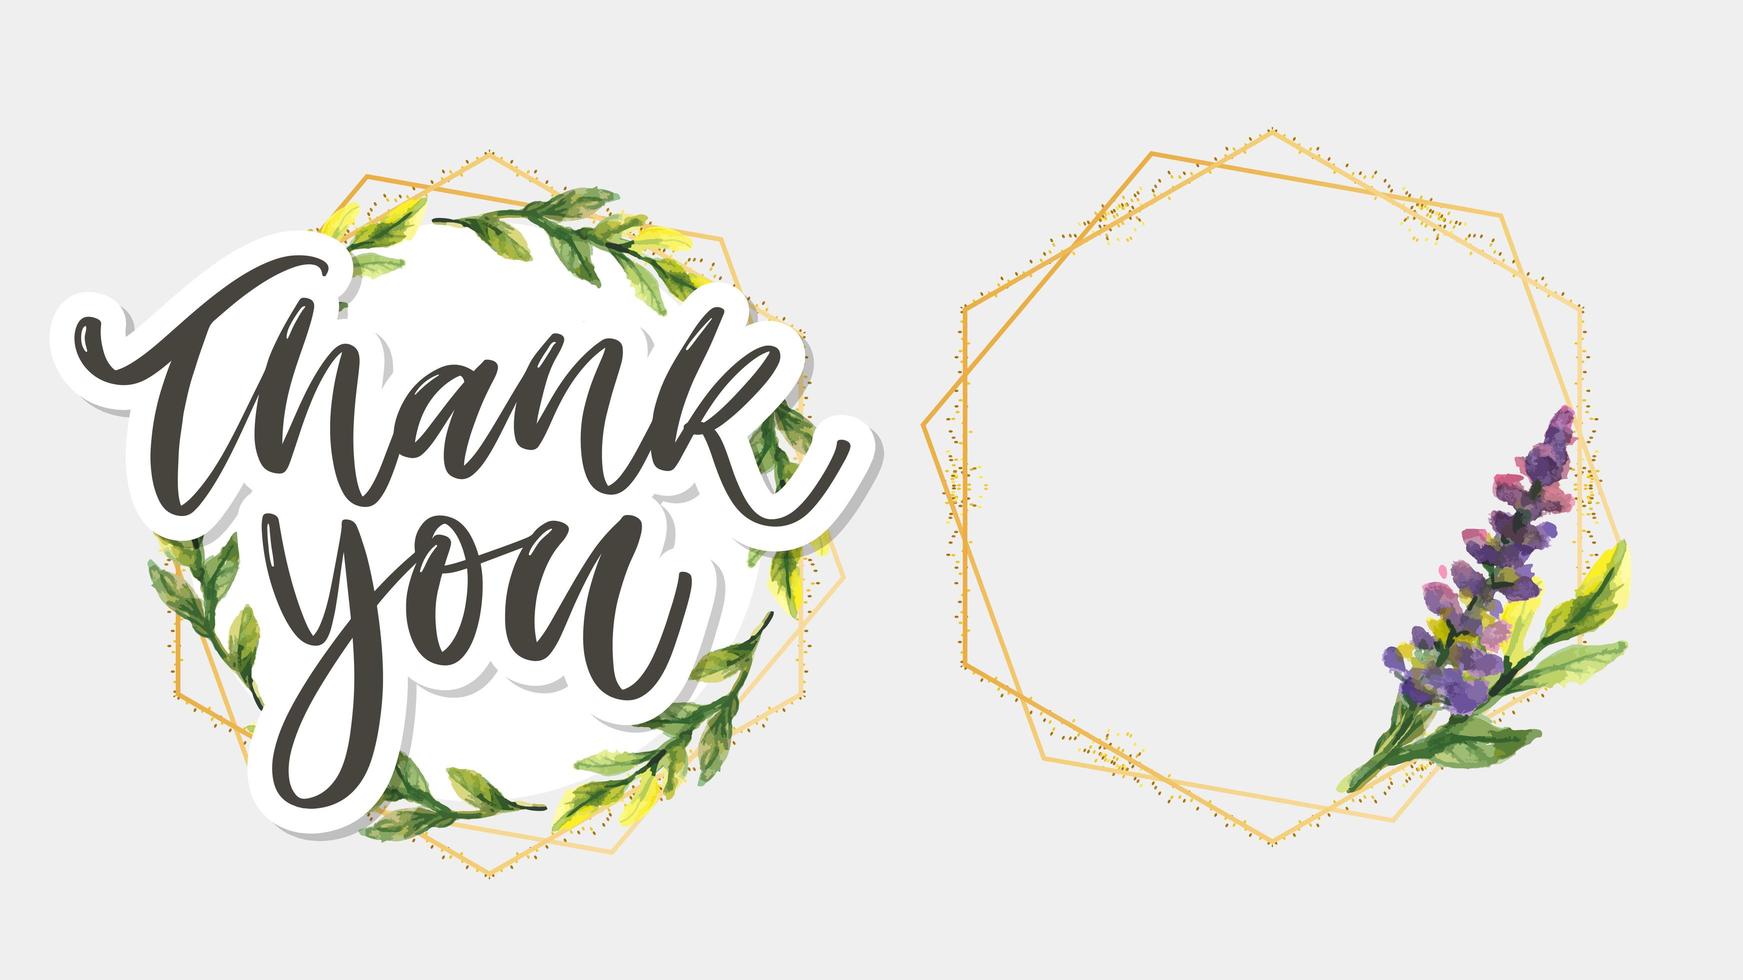 Cute Thank You Script Card Flowers Letter text vector